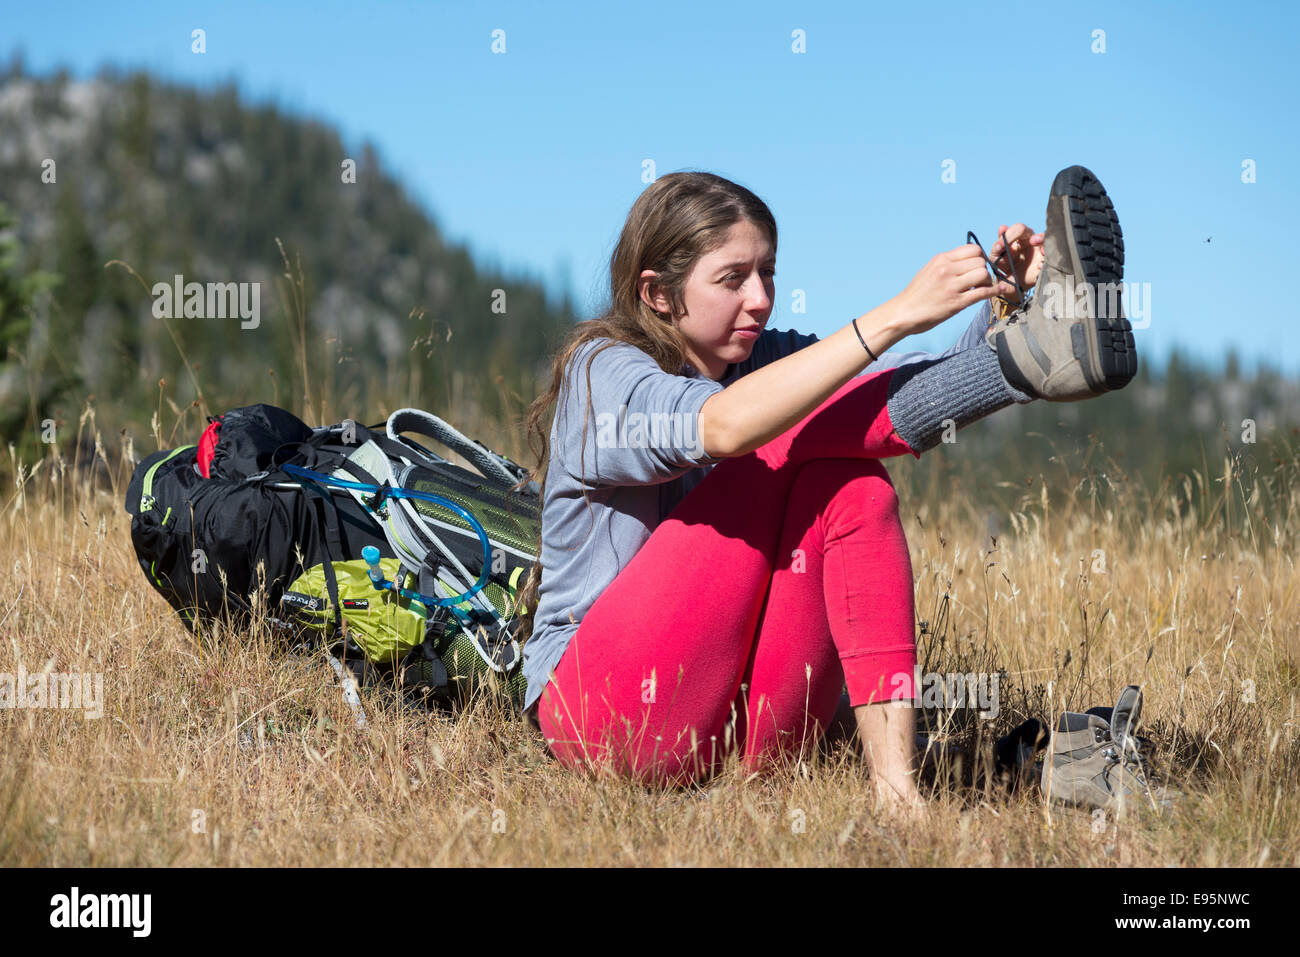 Woman putting on her hiking boots on a backpack trip in Oregon's